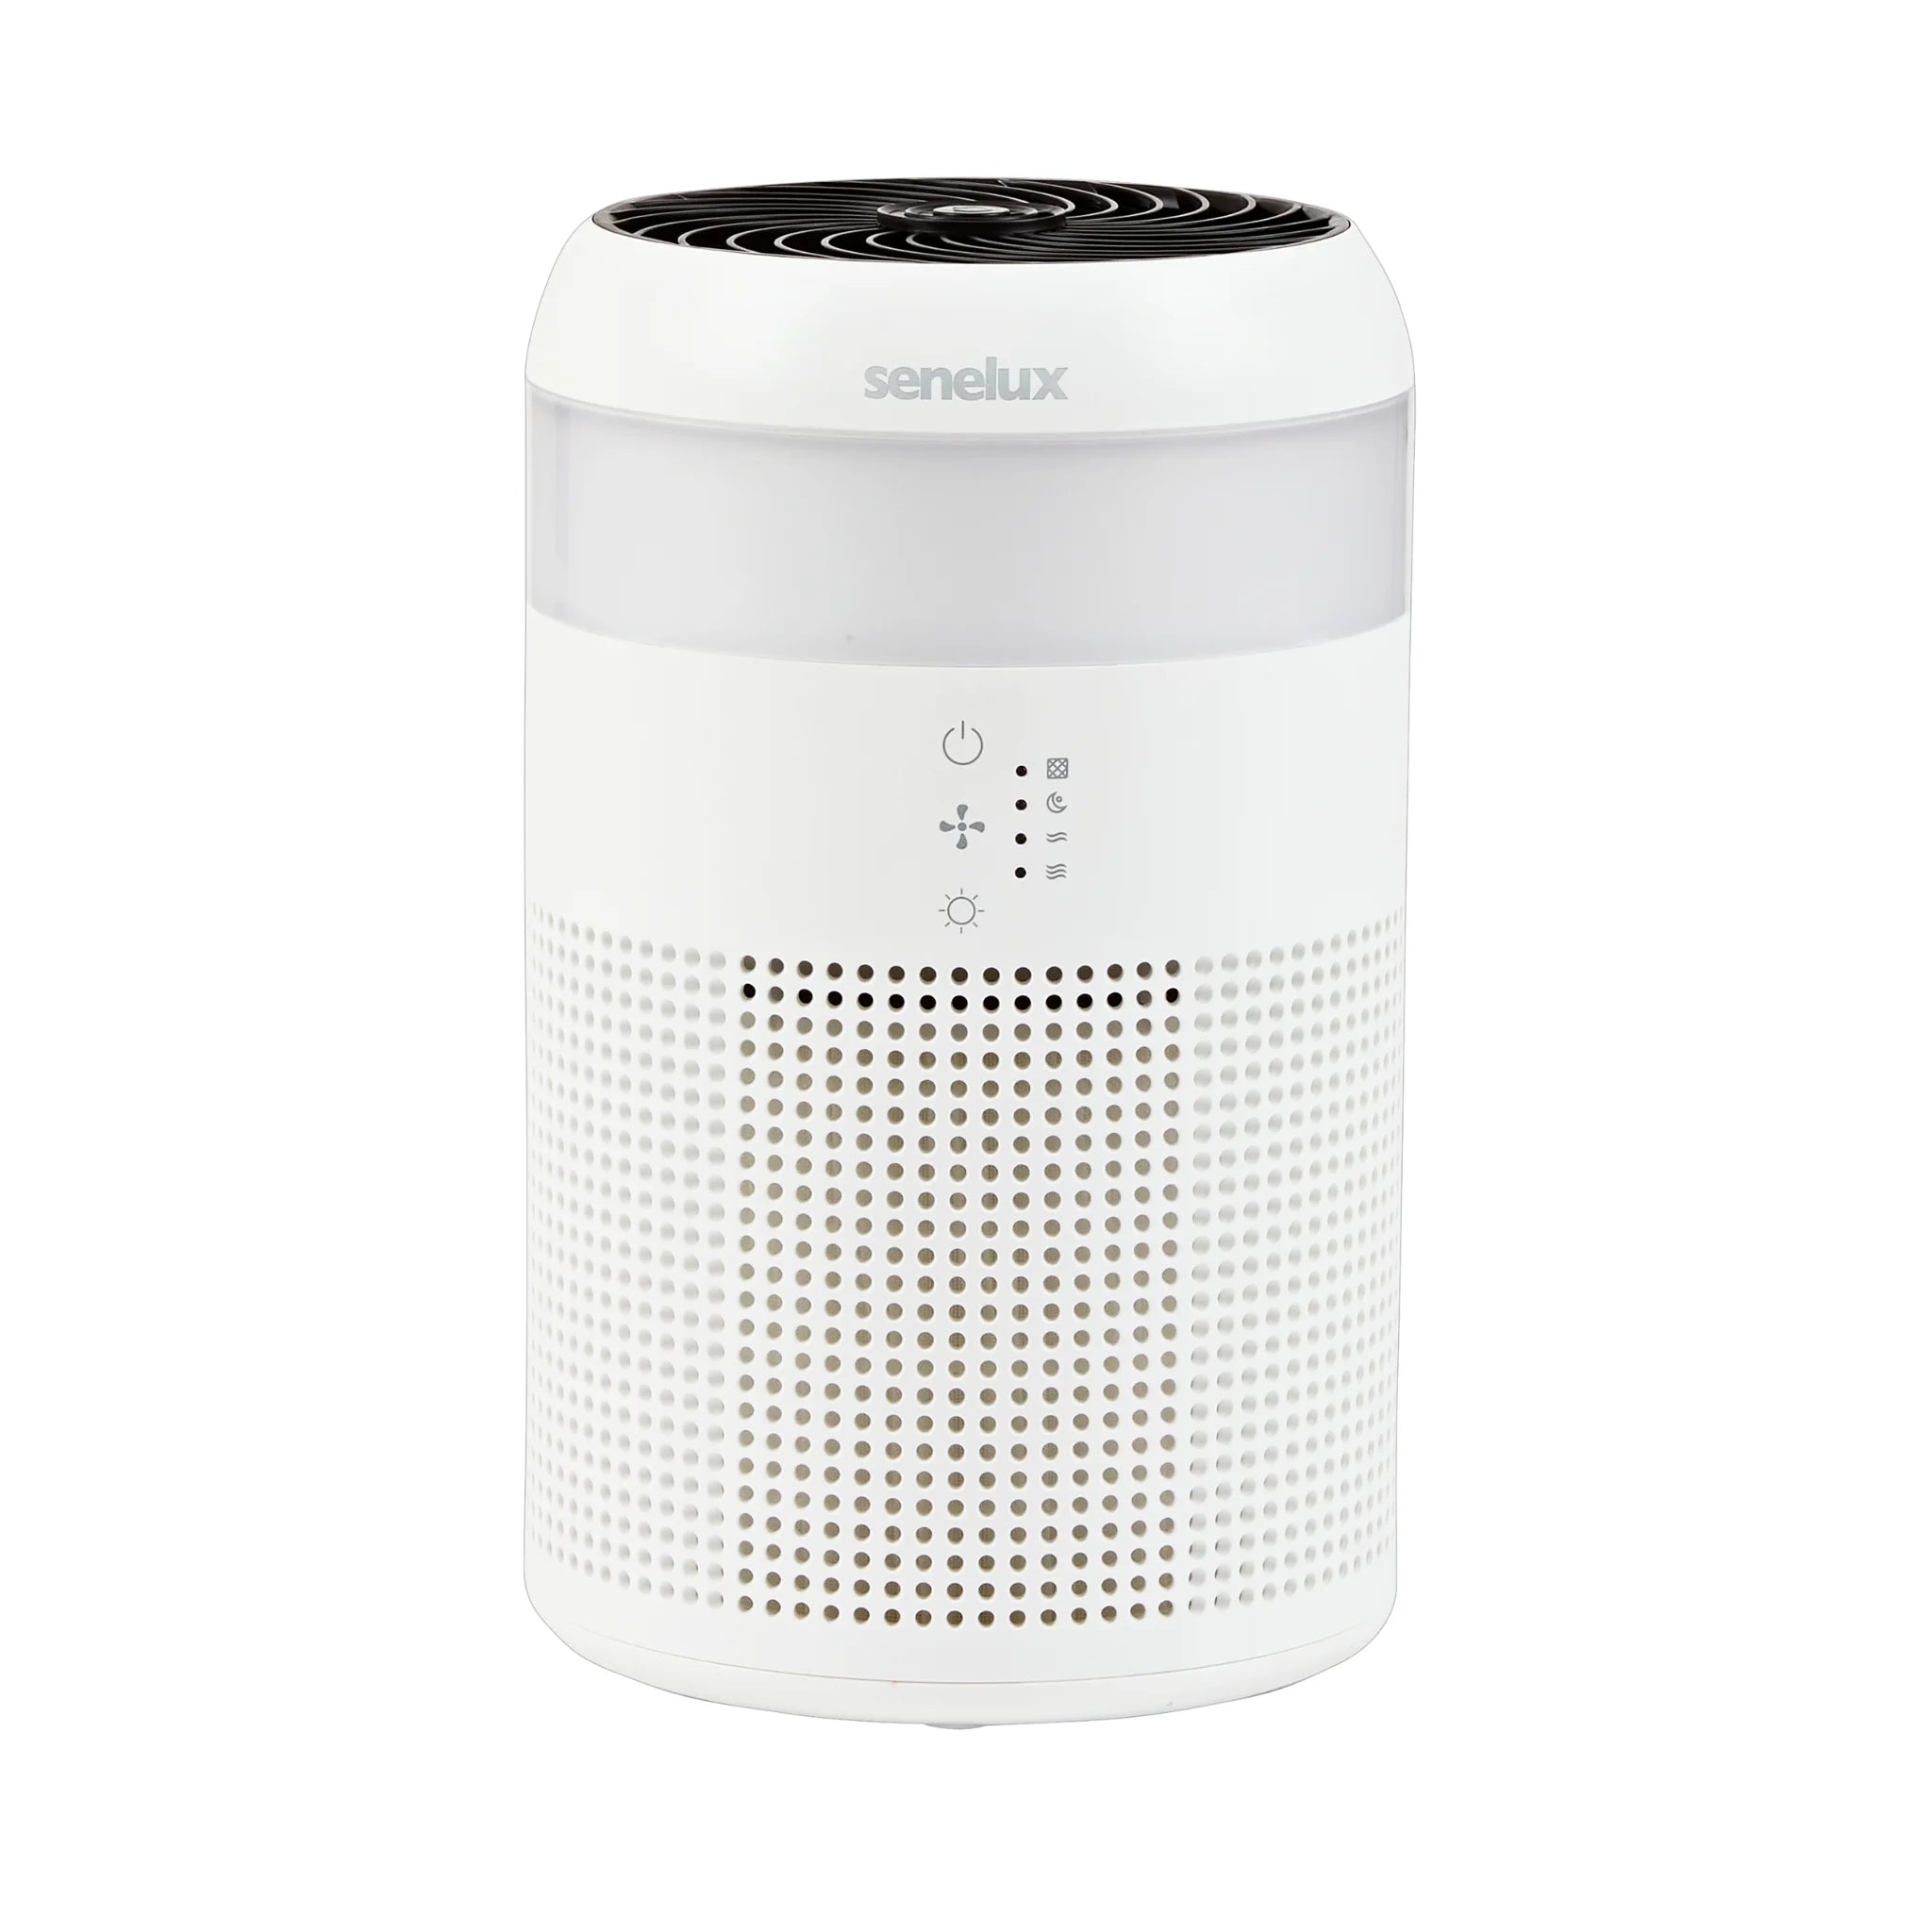 A Senelux Air Purifier with a sleek, all white design with an unlit LED light strip near the top of the purifier.